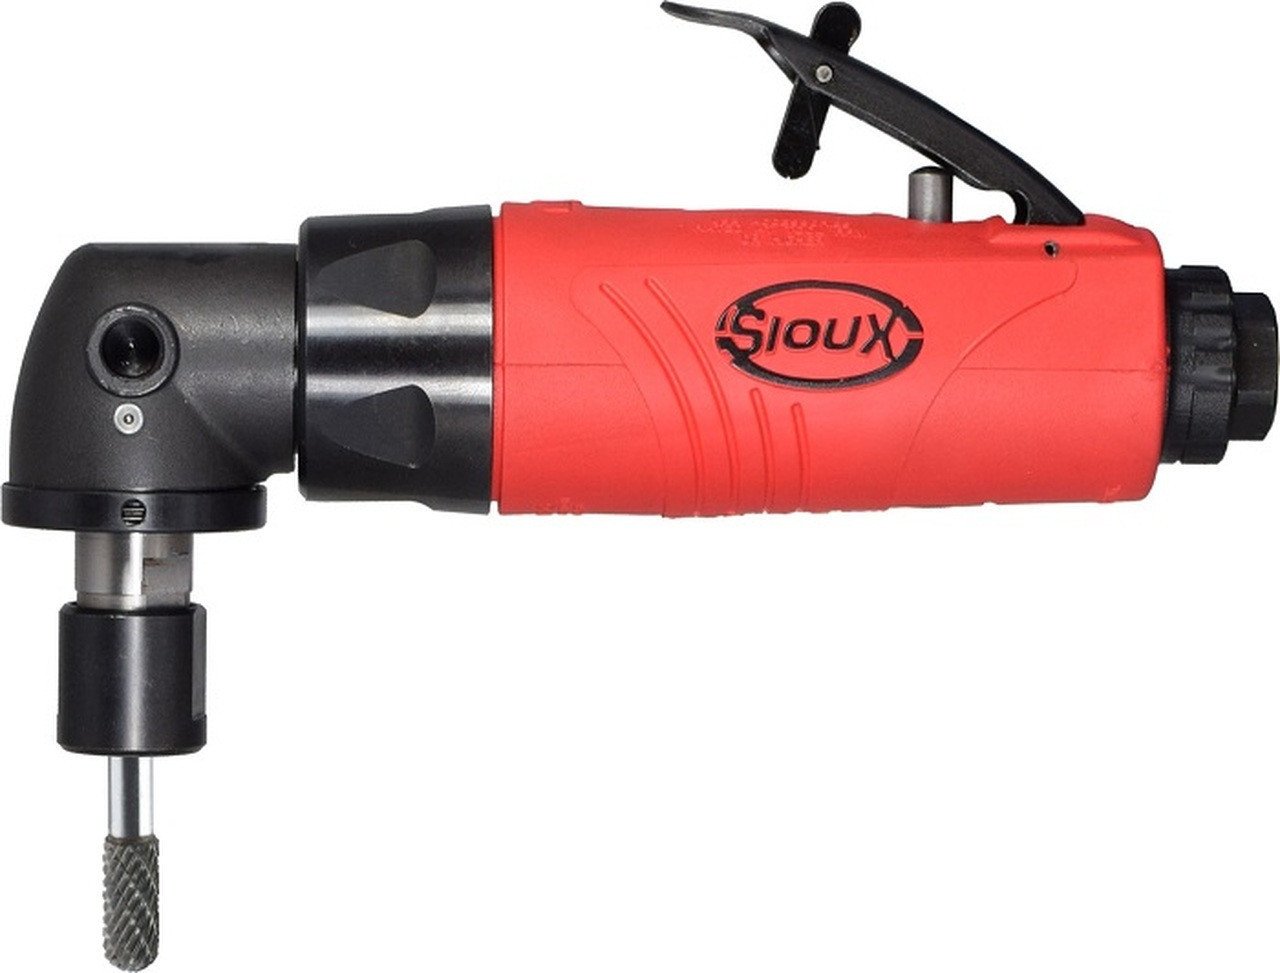 Sioux Tools SAG05S18 Right Angle Die Grinder | 0.5 HP | 18000 RPM | 200 Series Collet | Rear Exhaust